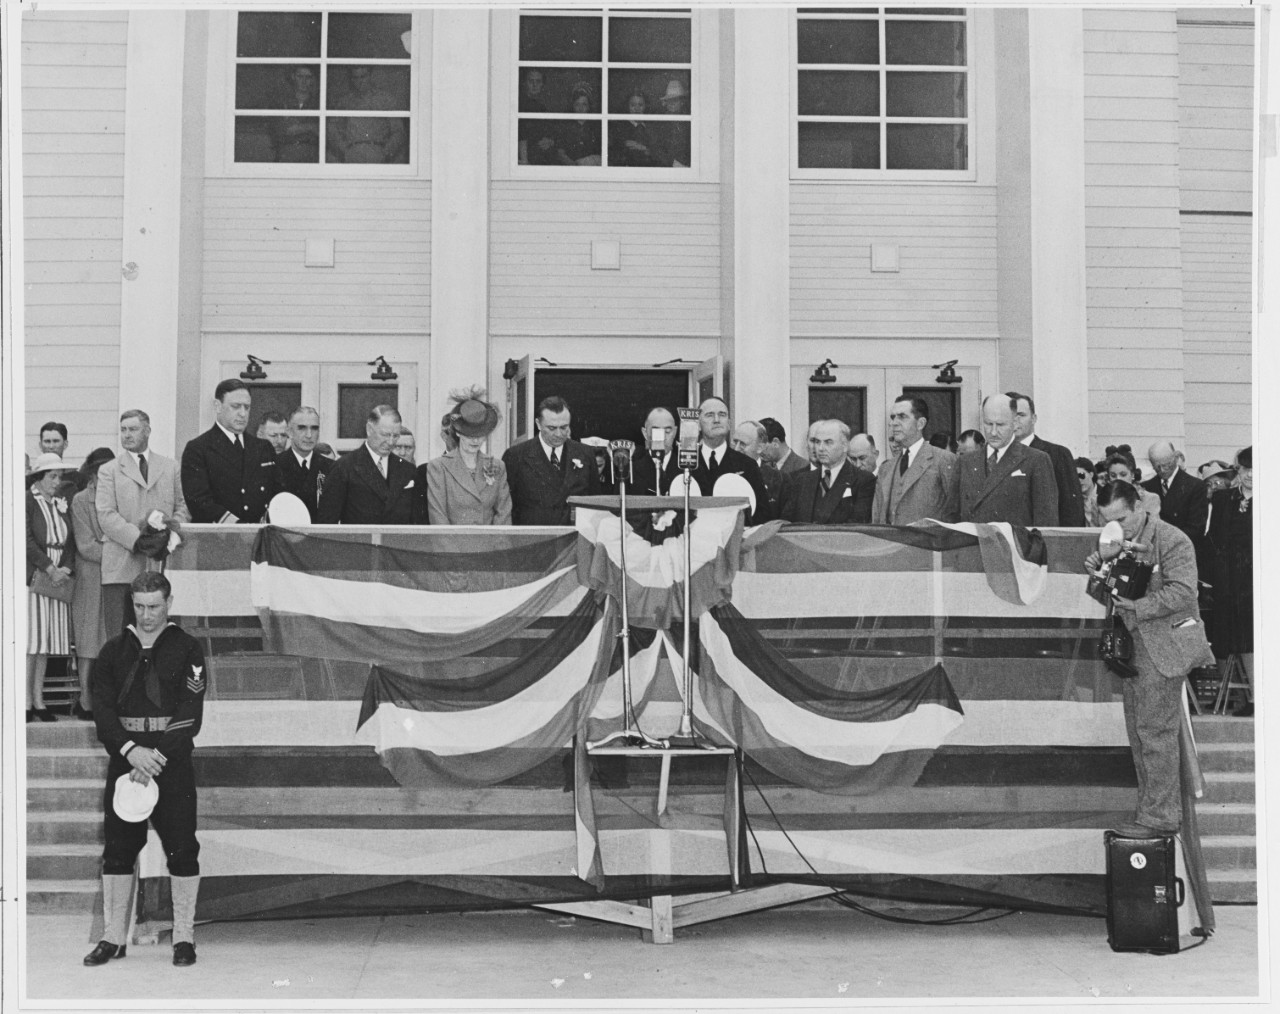 Naval Officials and Dignitaries.  Benediction at Dedication Ceremonies, U.S. Naval Air Station, Corpus Christi, Texas. March 12, 1941